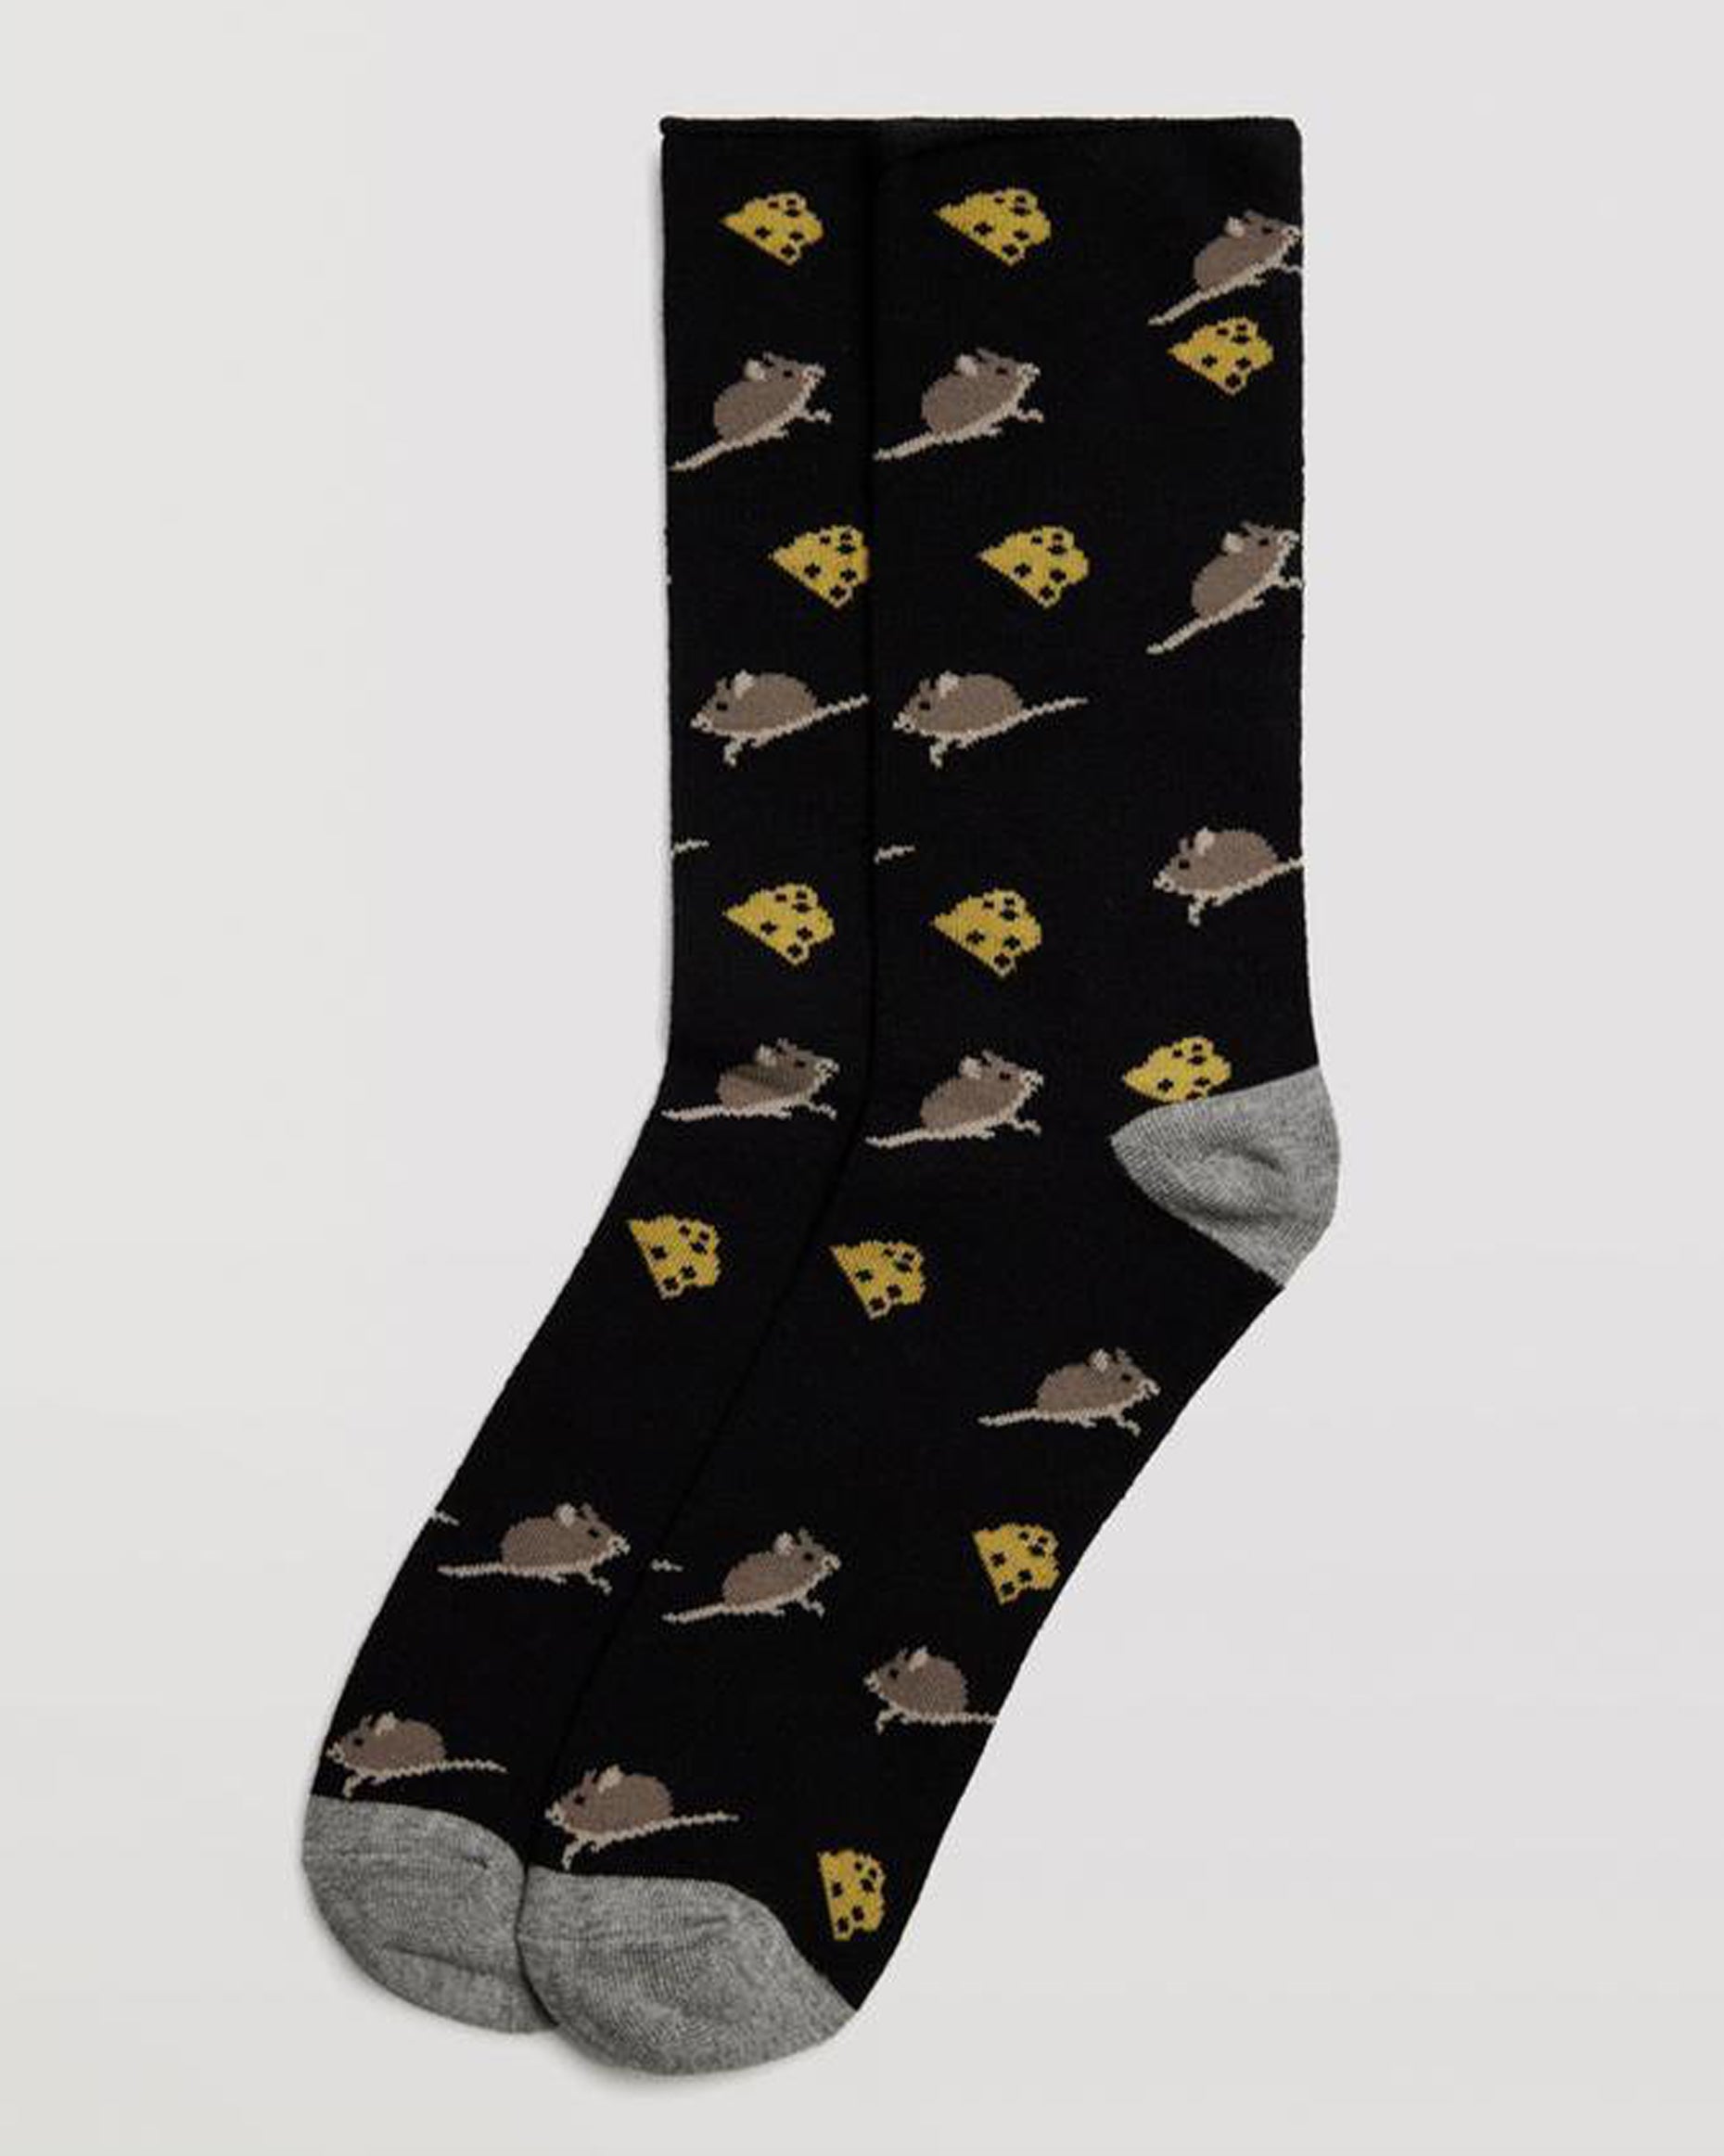 Ysabel Mora 22882 Mouse Sock - Black cotton mix crew length ankle socks with a mouse and cheese pattern in shades of brown and yellow, grey heel and toe.